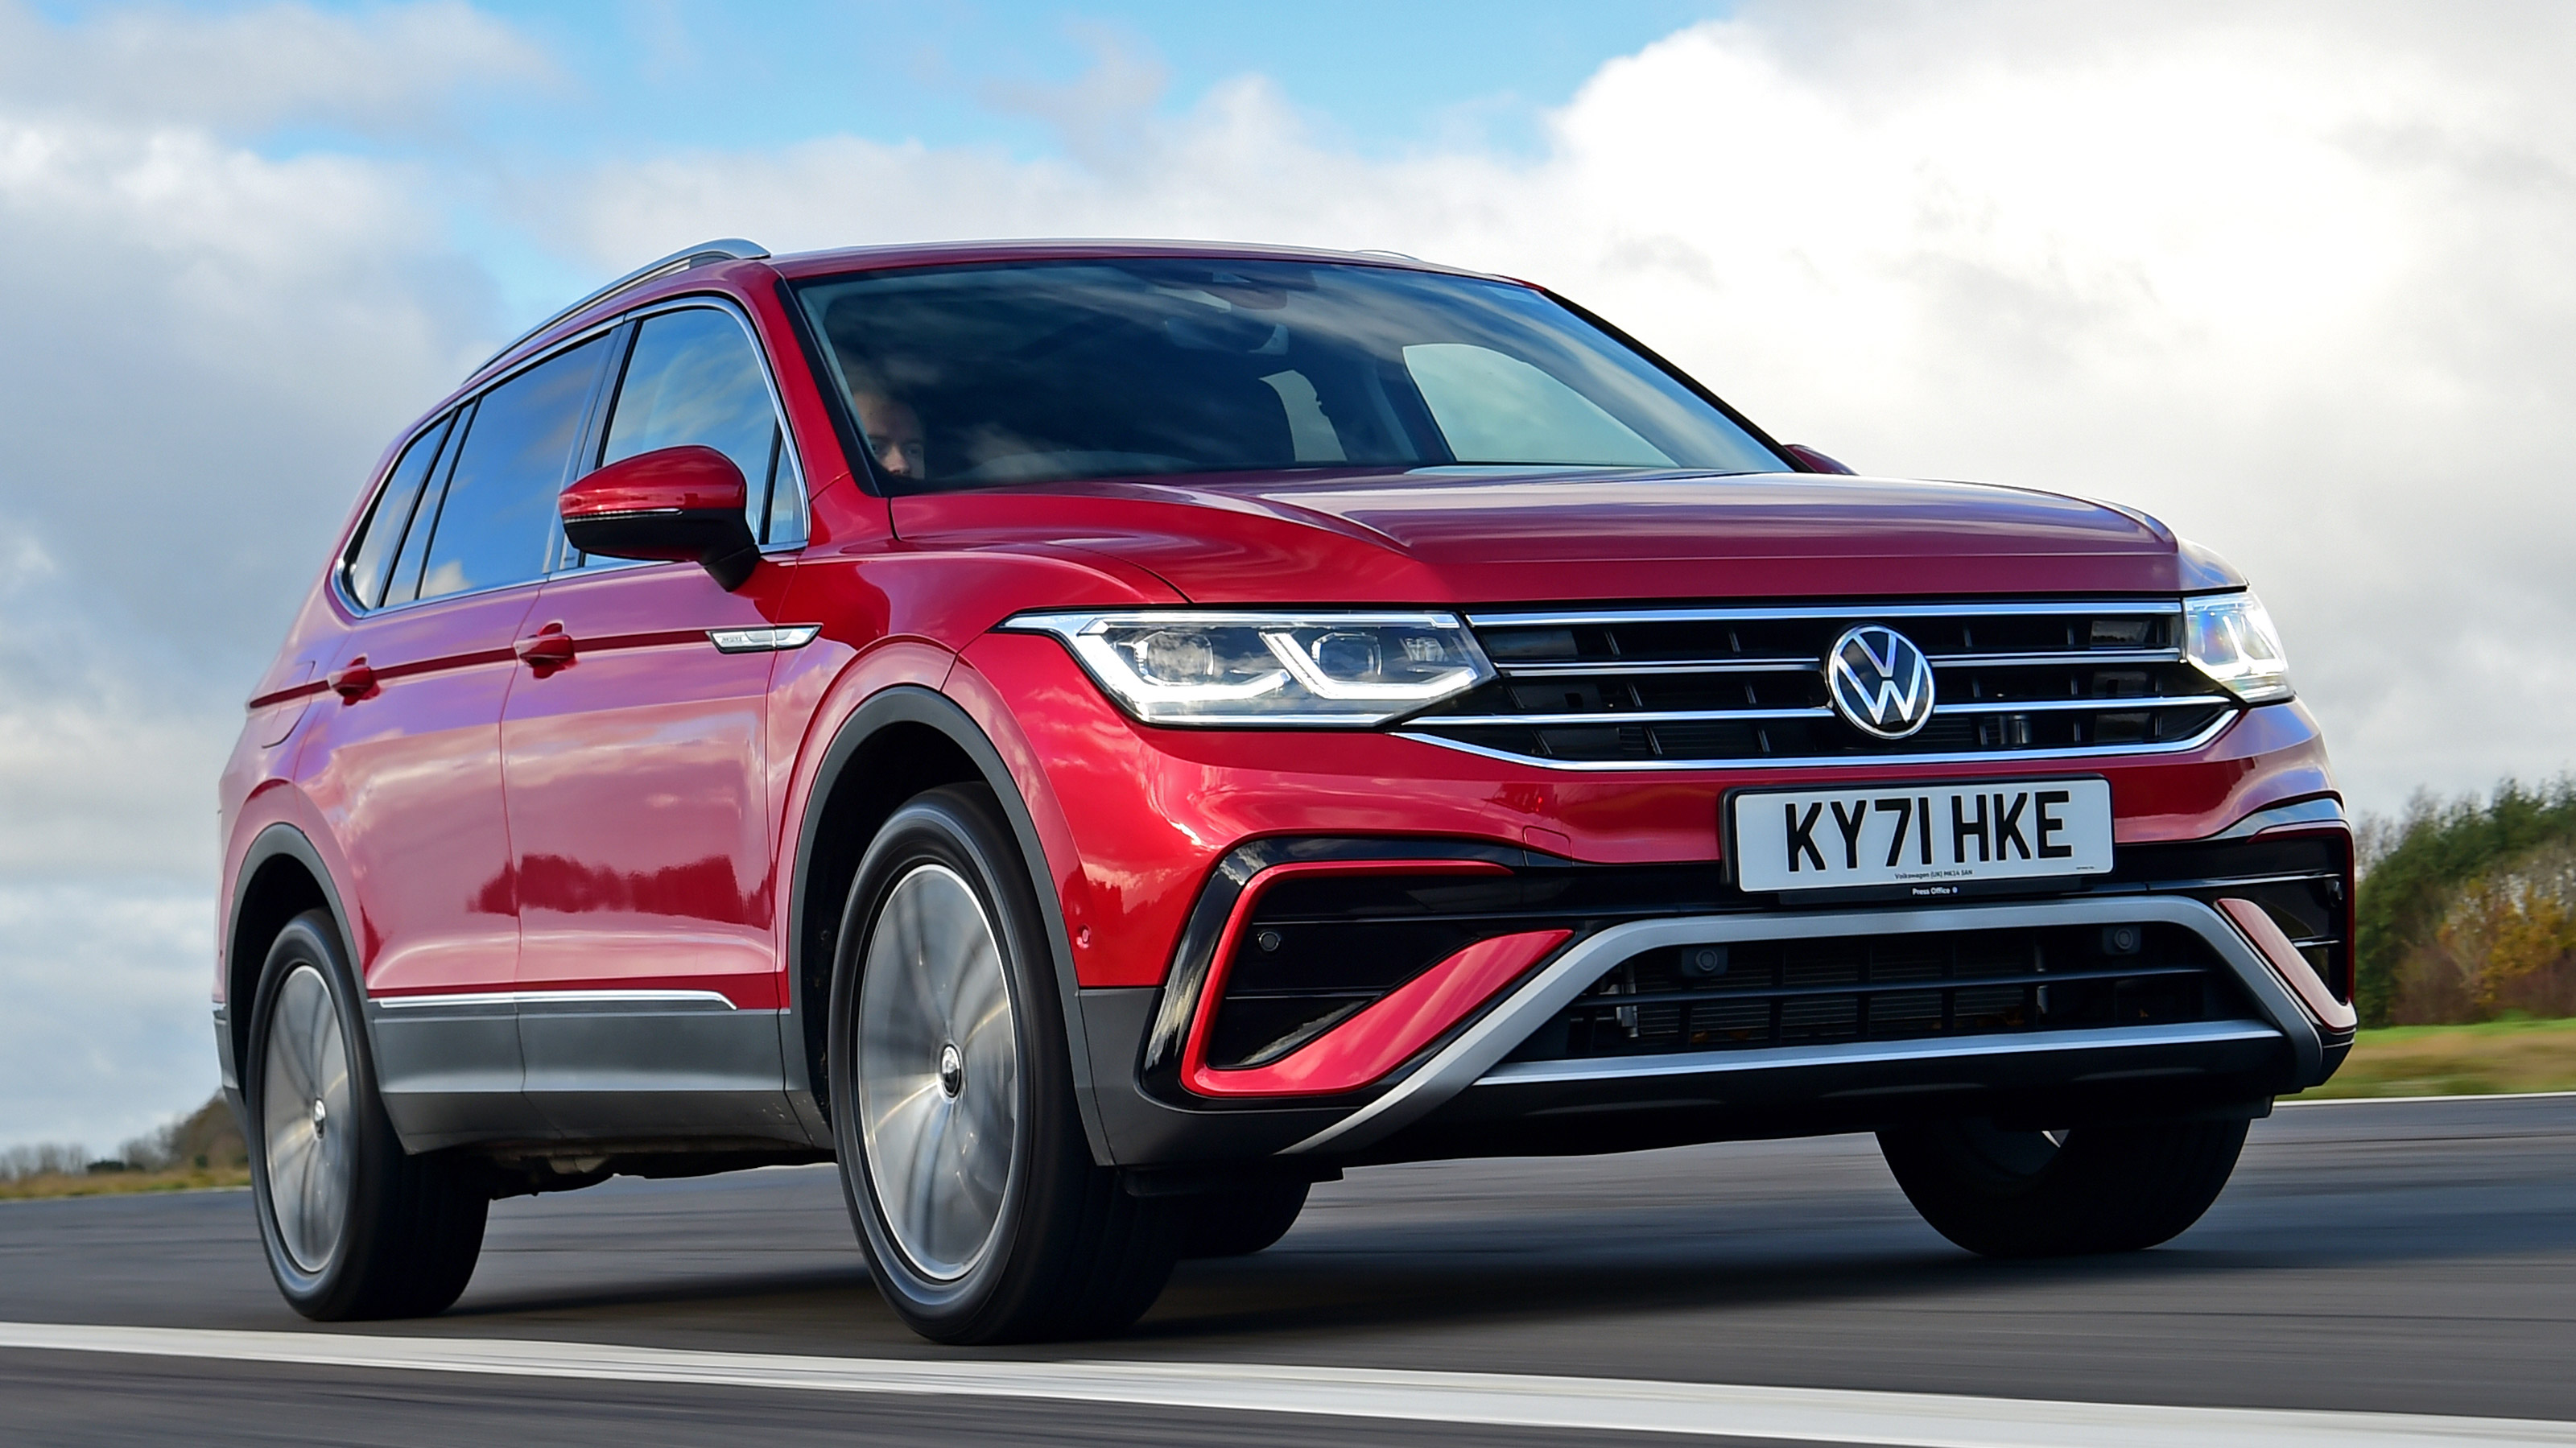 Volkswagen Tiguan Allspace dimensions, boot space and similars